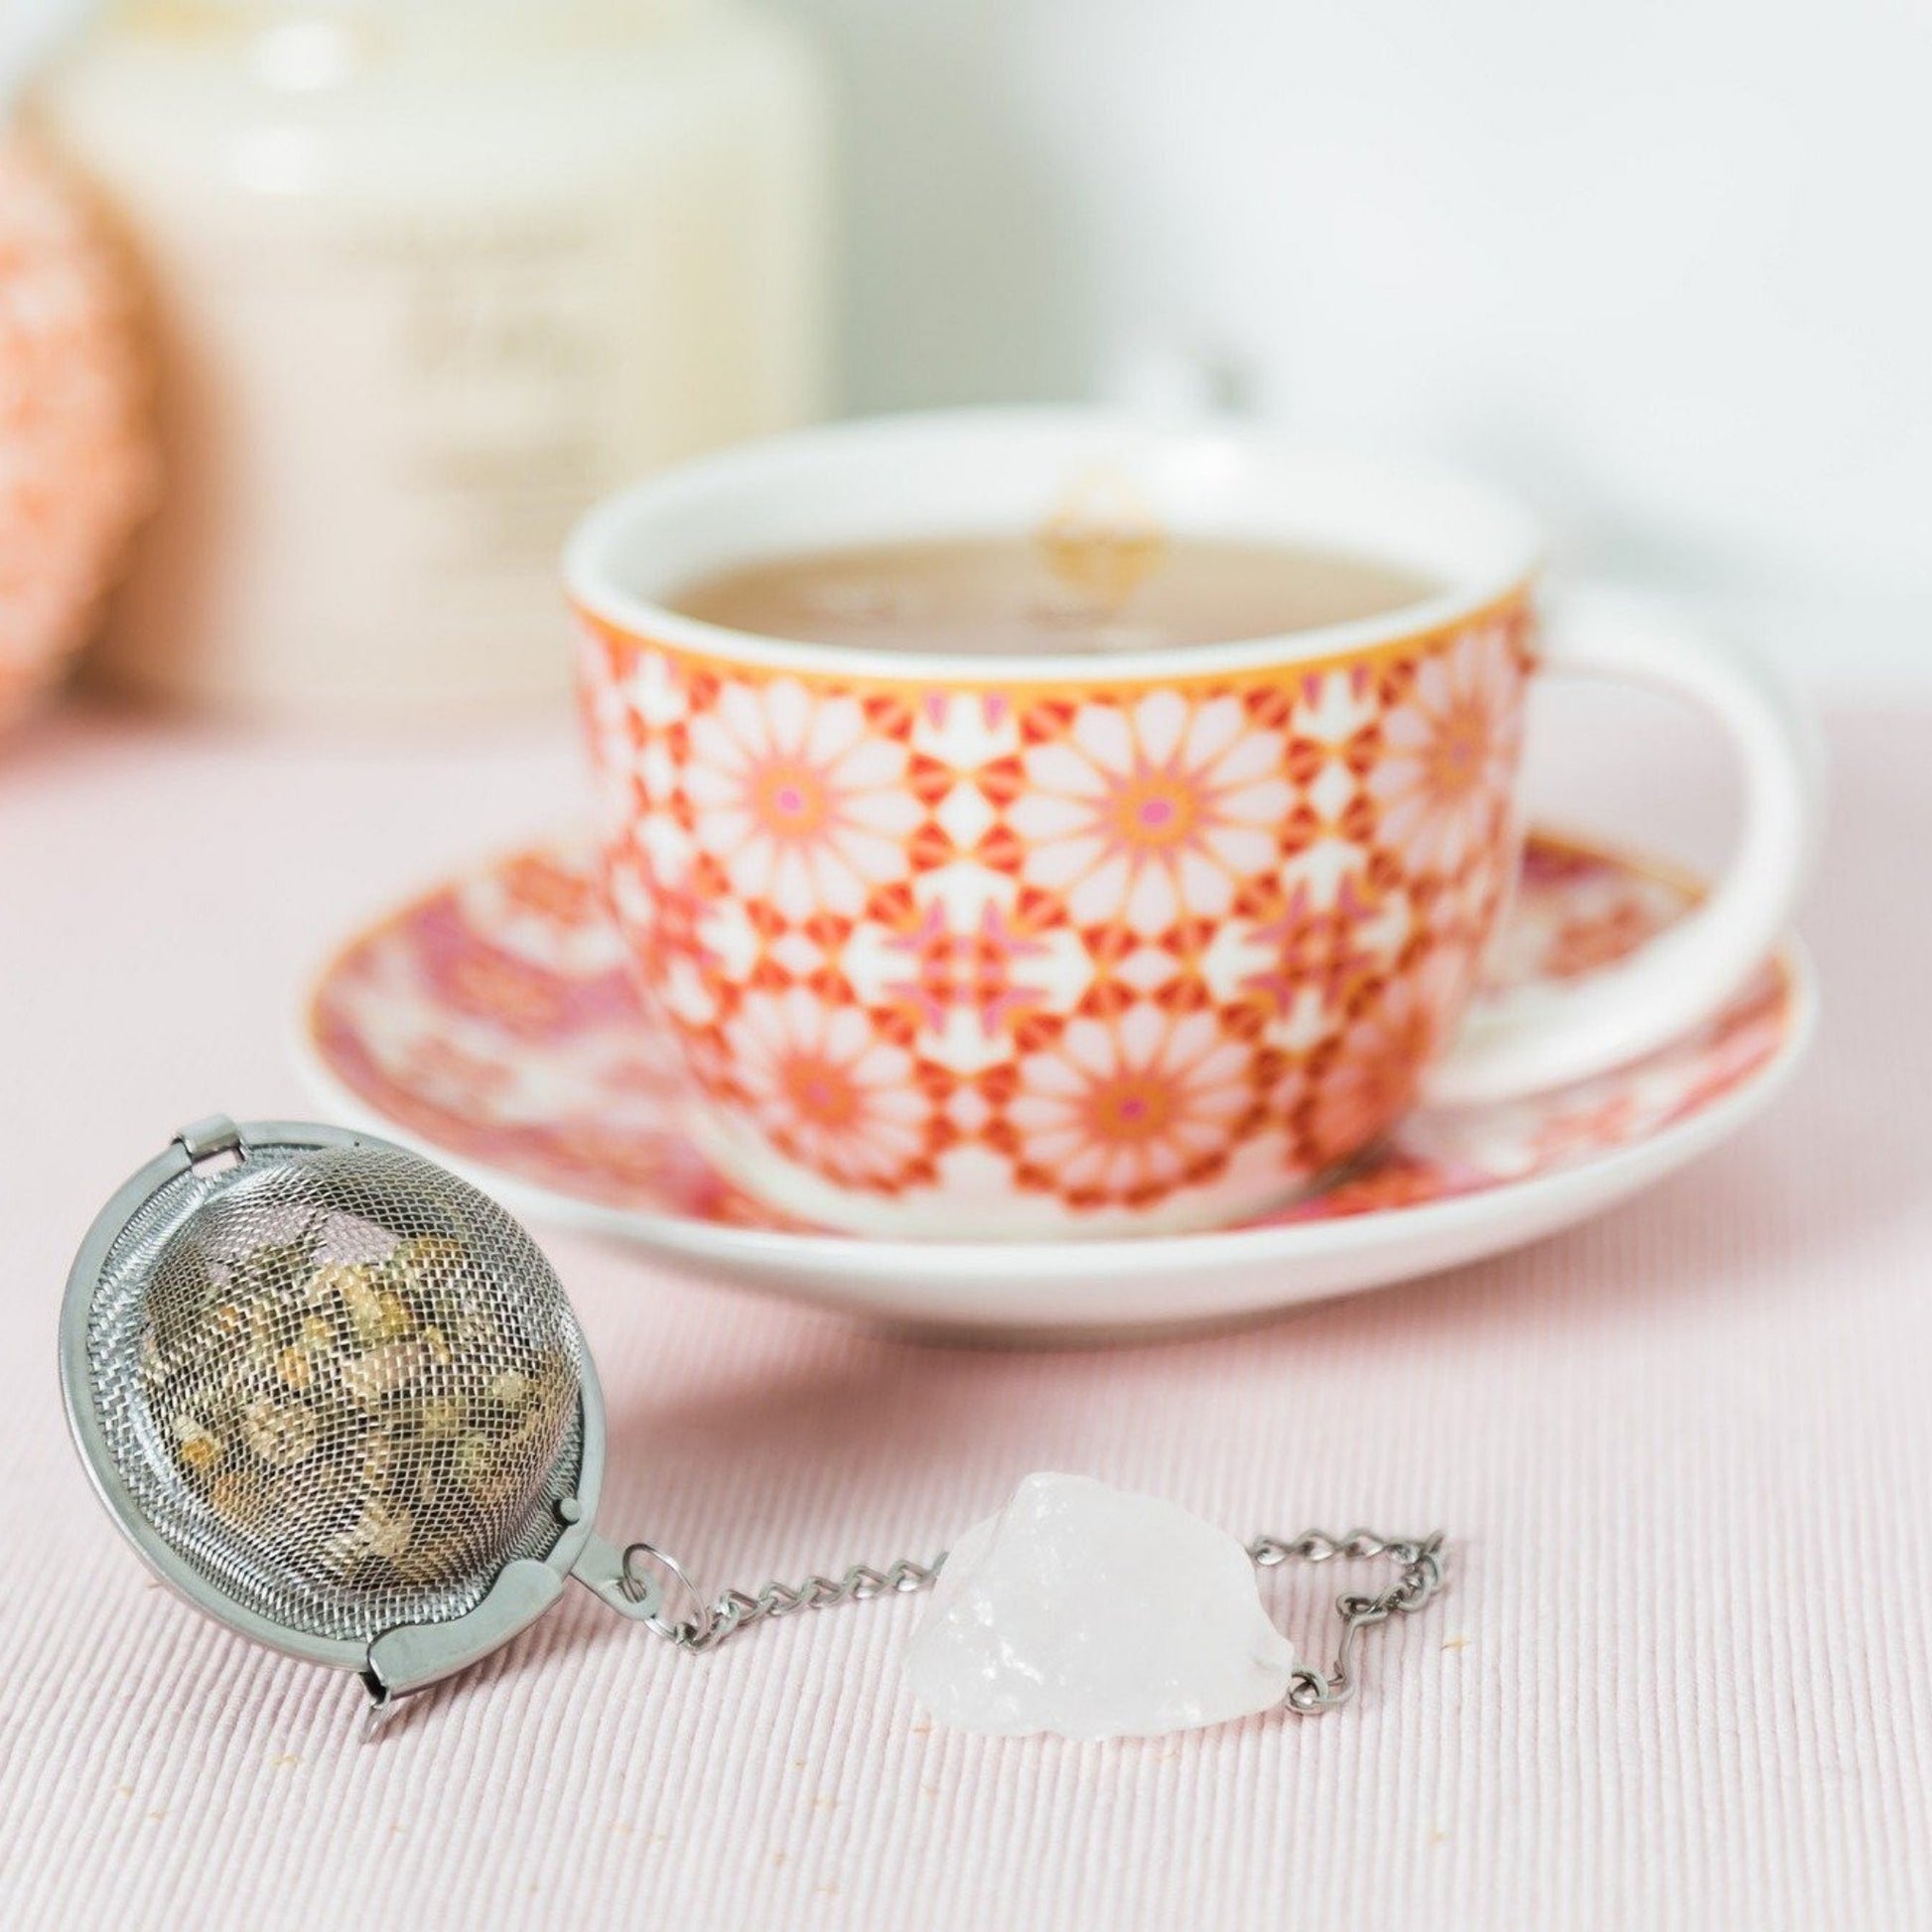 stainless tea strainer with clear quartz stone beside teacup 